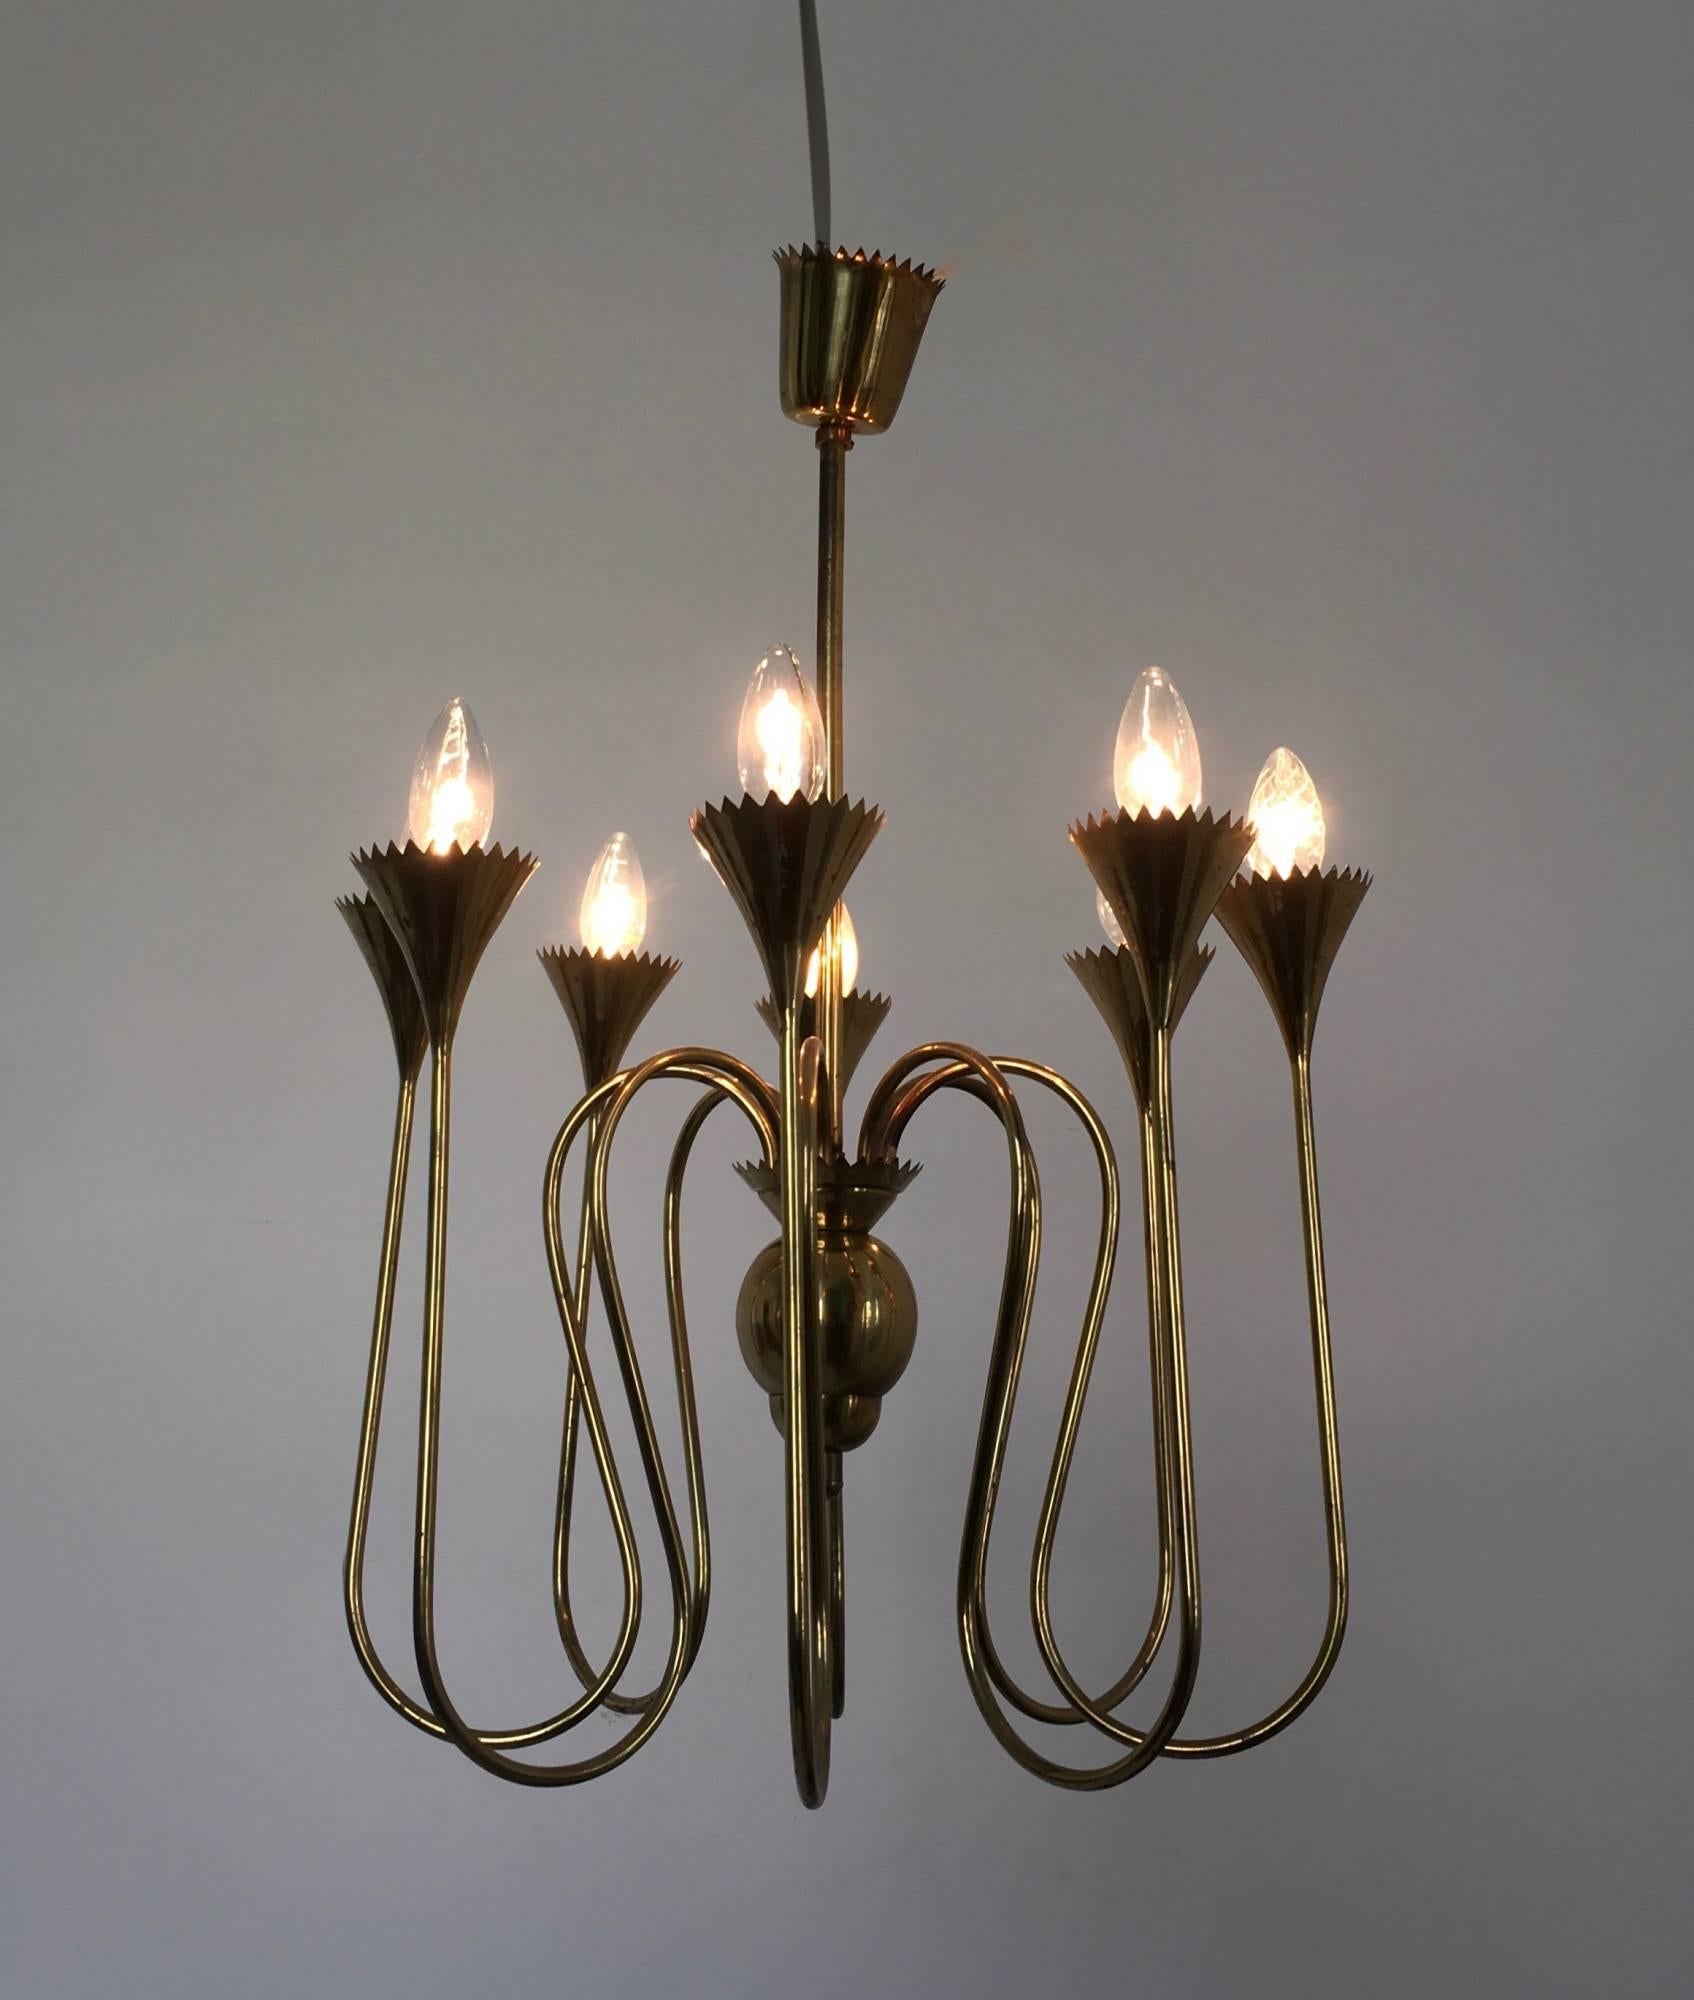 Made in Italy, 1940s.
It features a brass structure.
This chandelier is a vintage piece, therefore it might show slight traces of use, but it can be considered as in excellent original condition. 

Measures: Diameter: 45 cm
Height: 74 cm.